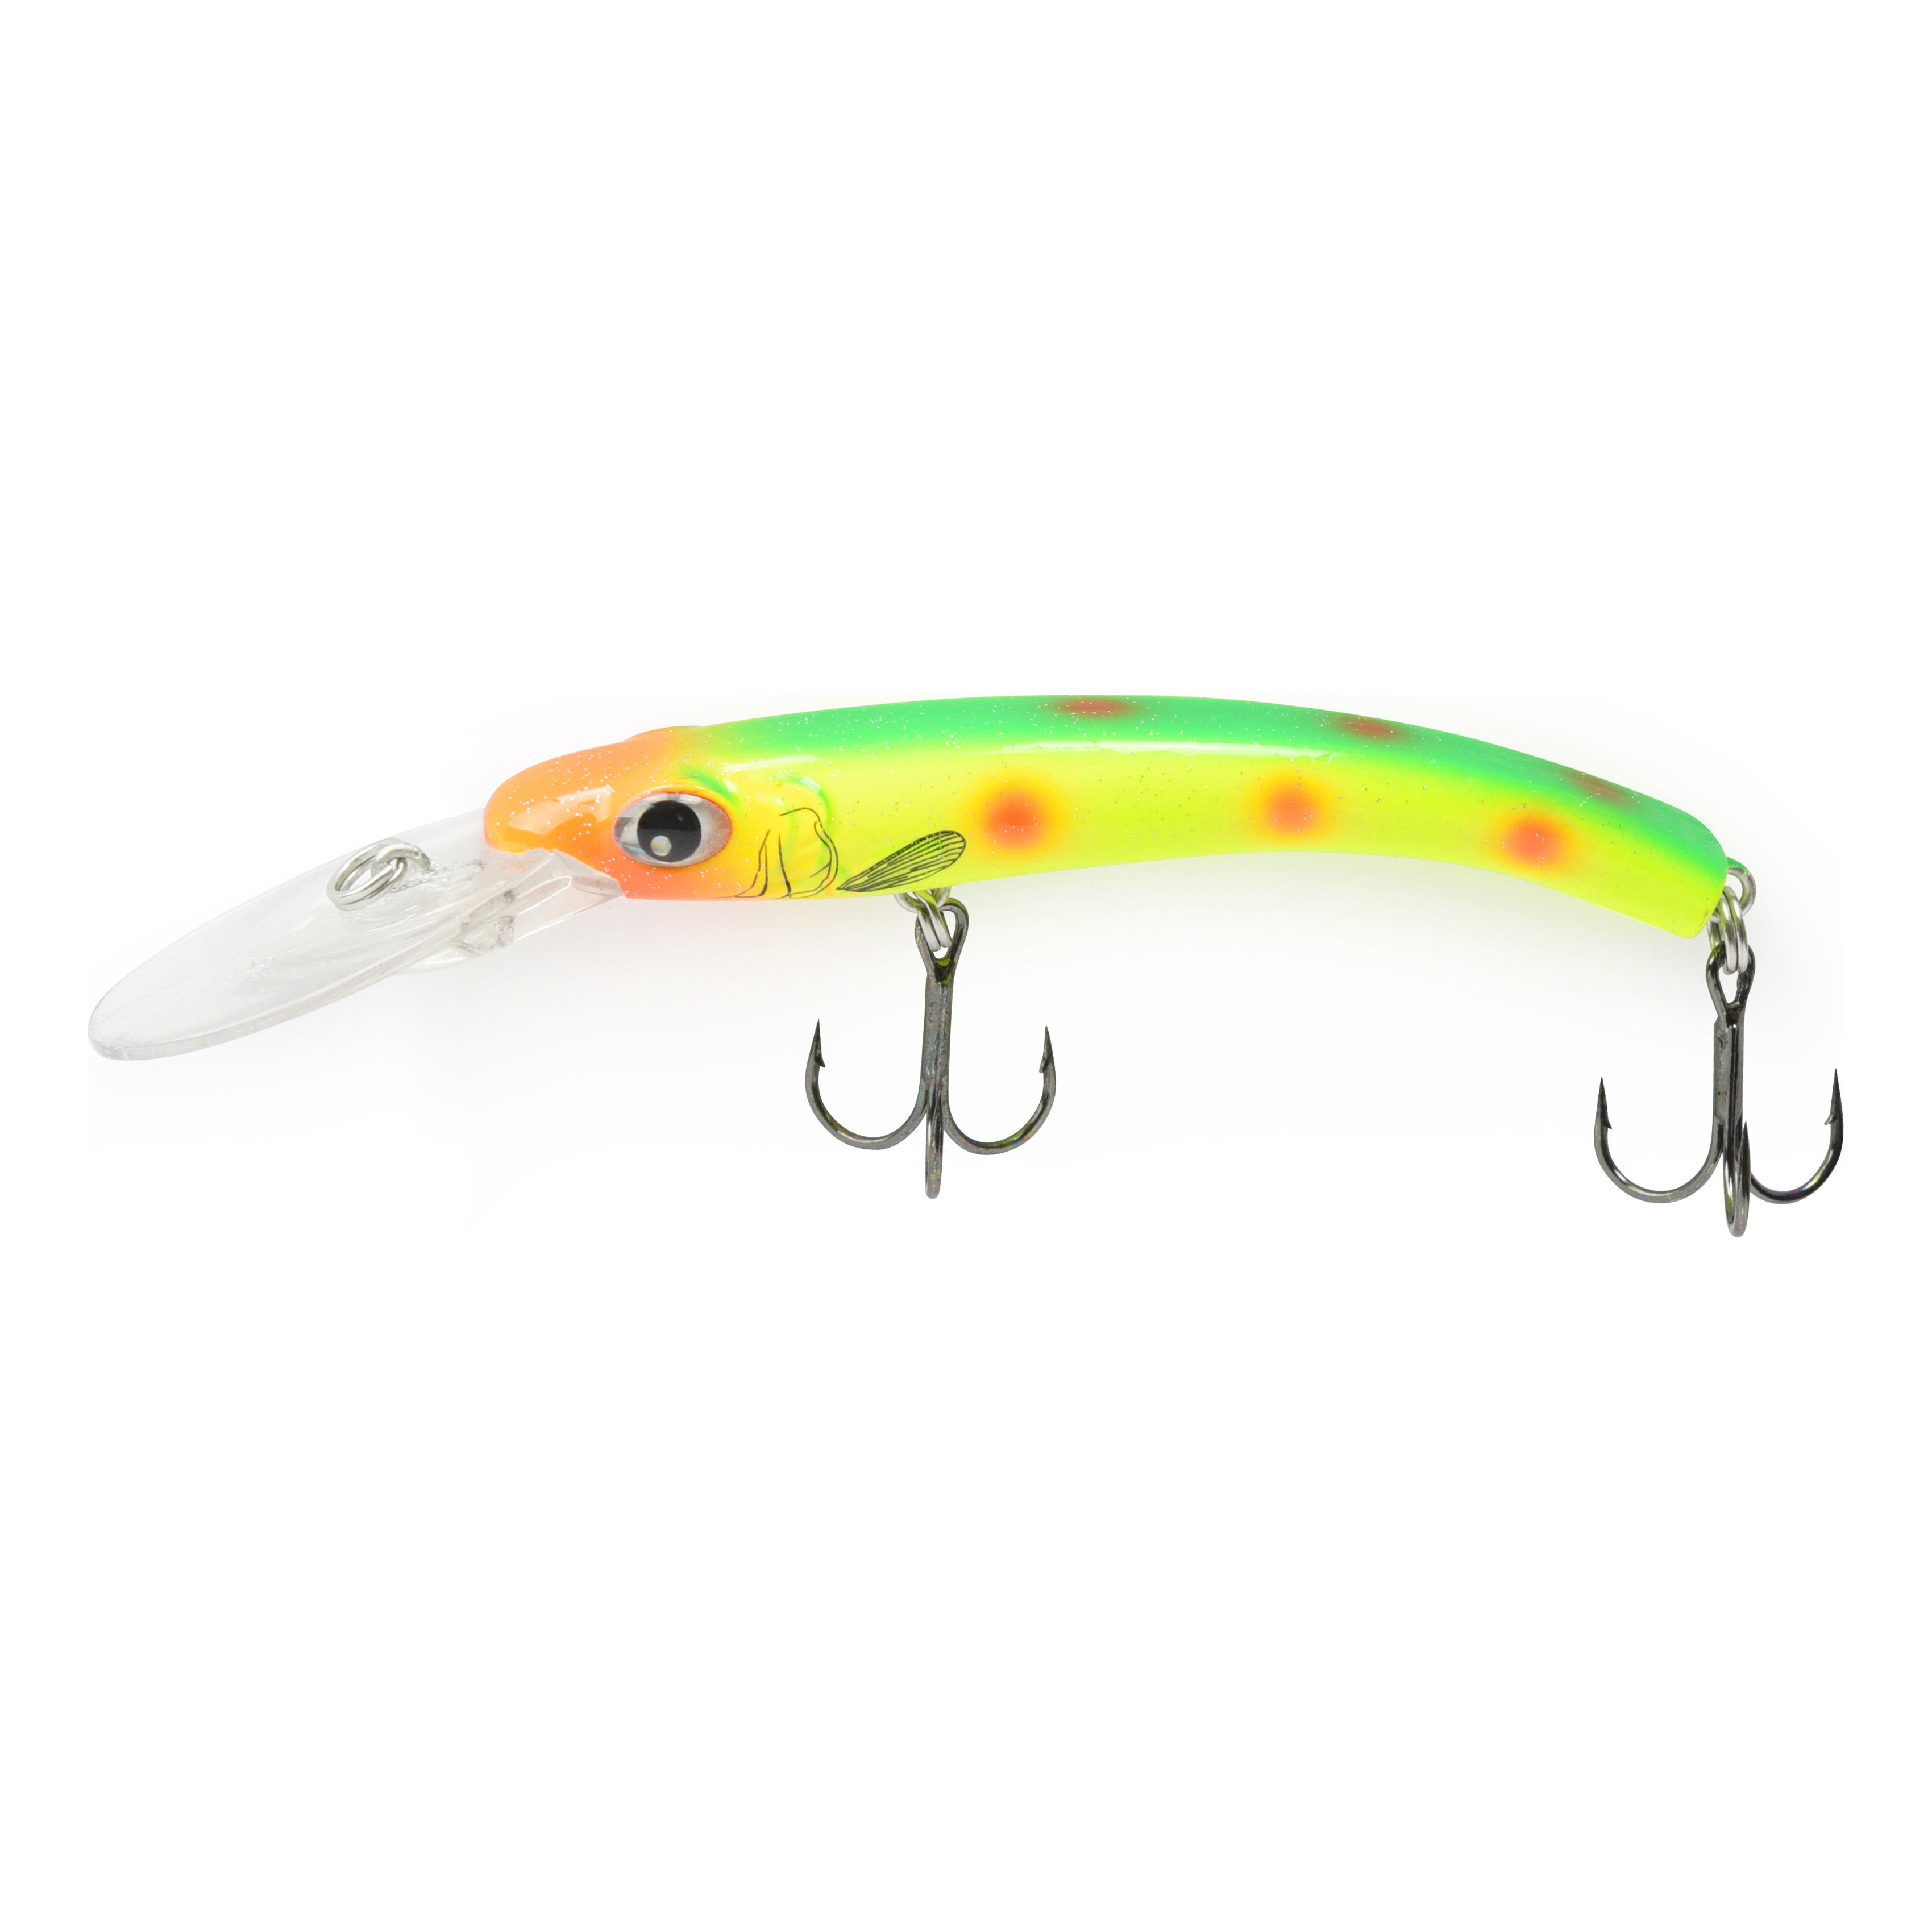 Buy fish lures for bass Online in Antigua and Barbuda at Low Prices at  desertcart